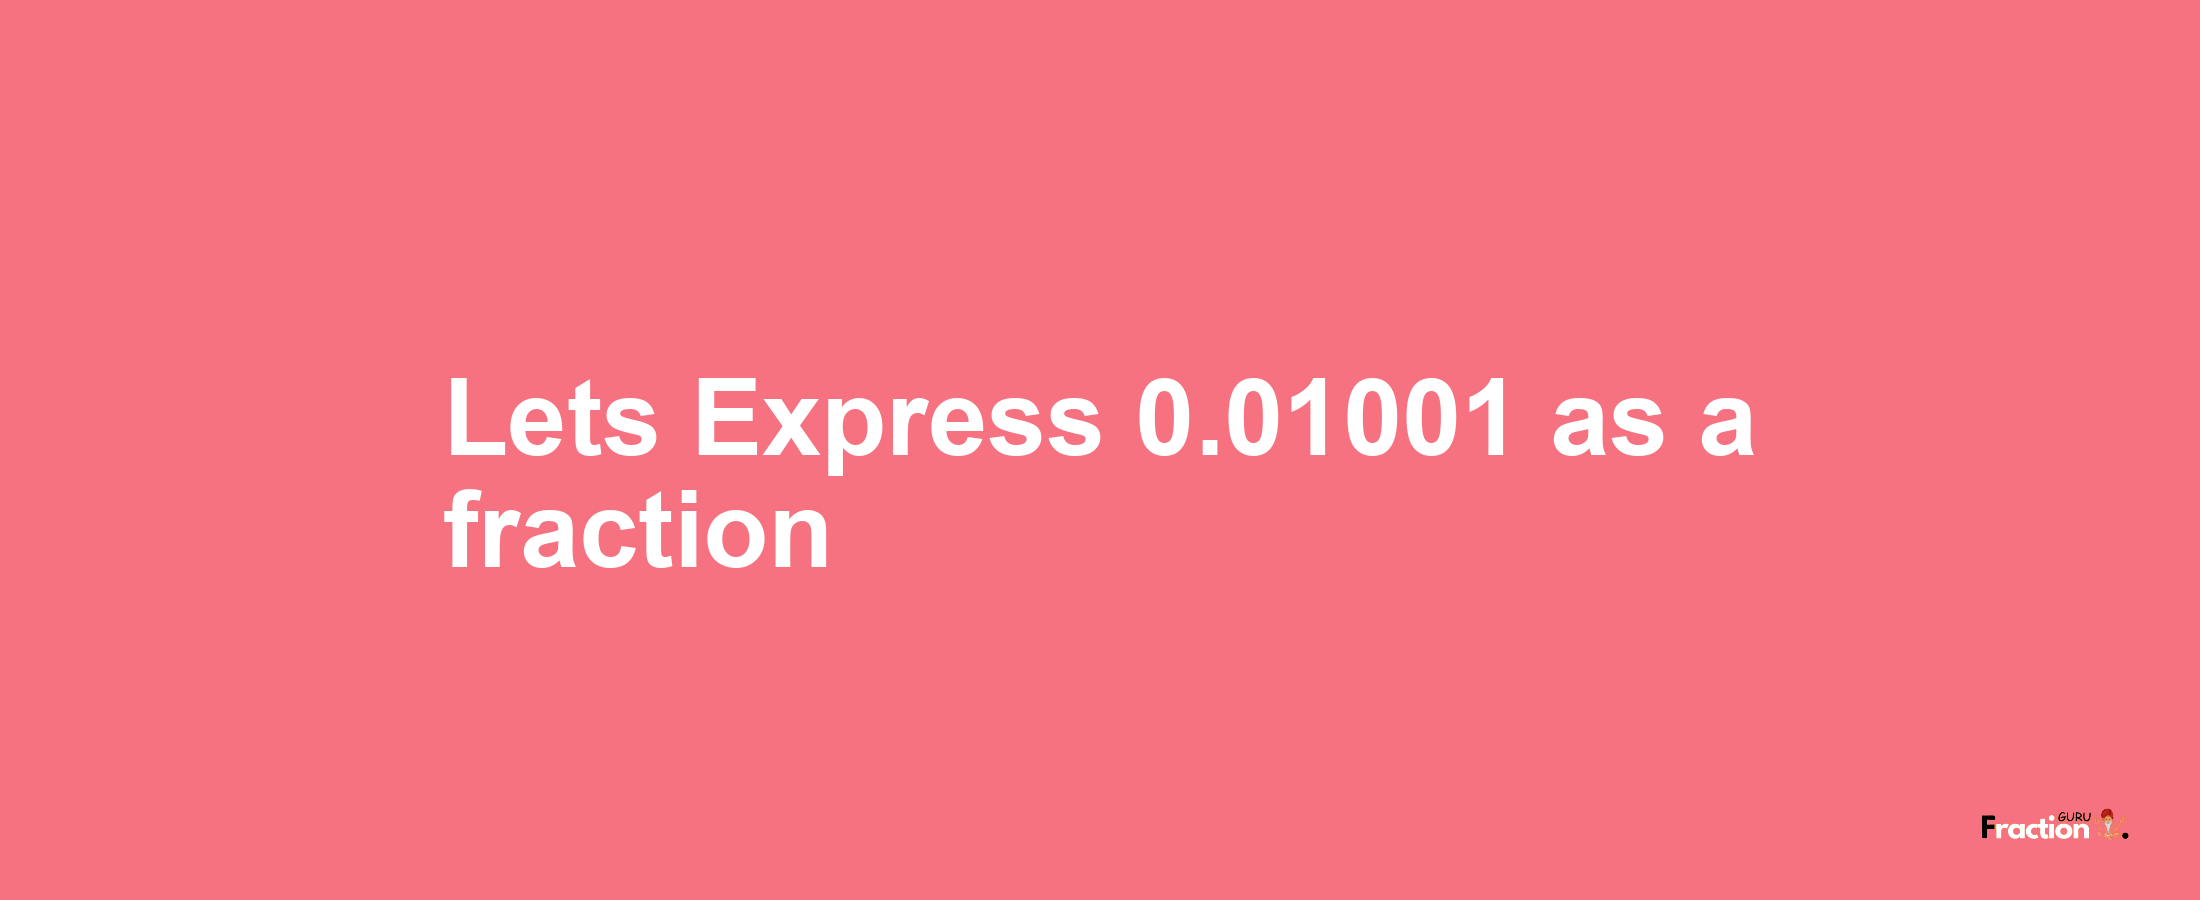 Lets Express 0.01001 as afraction